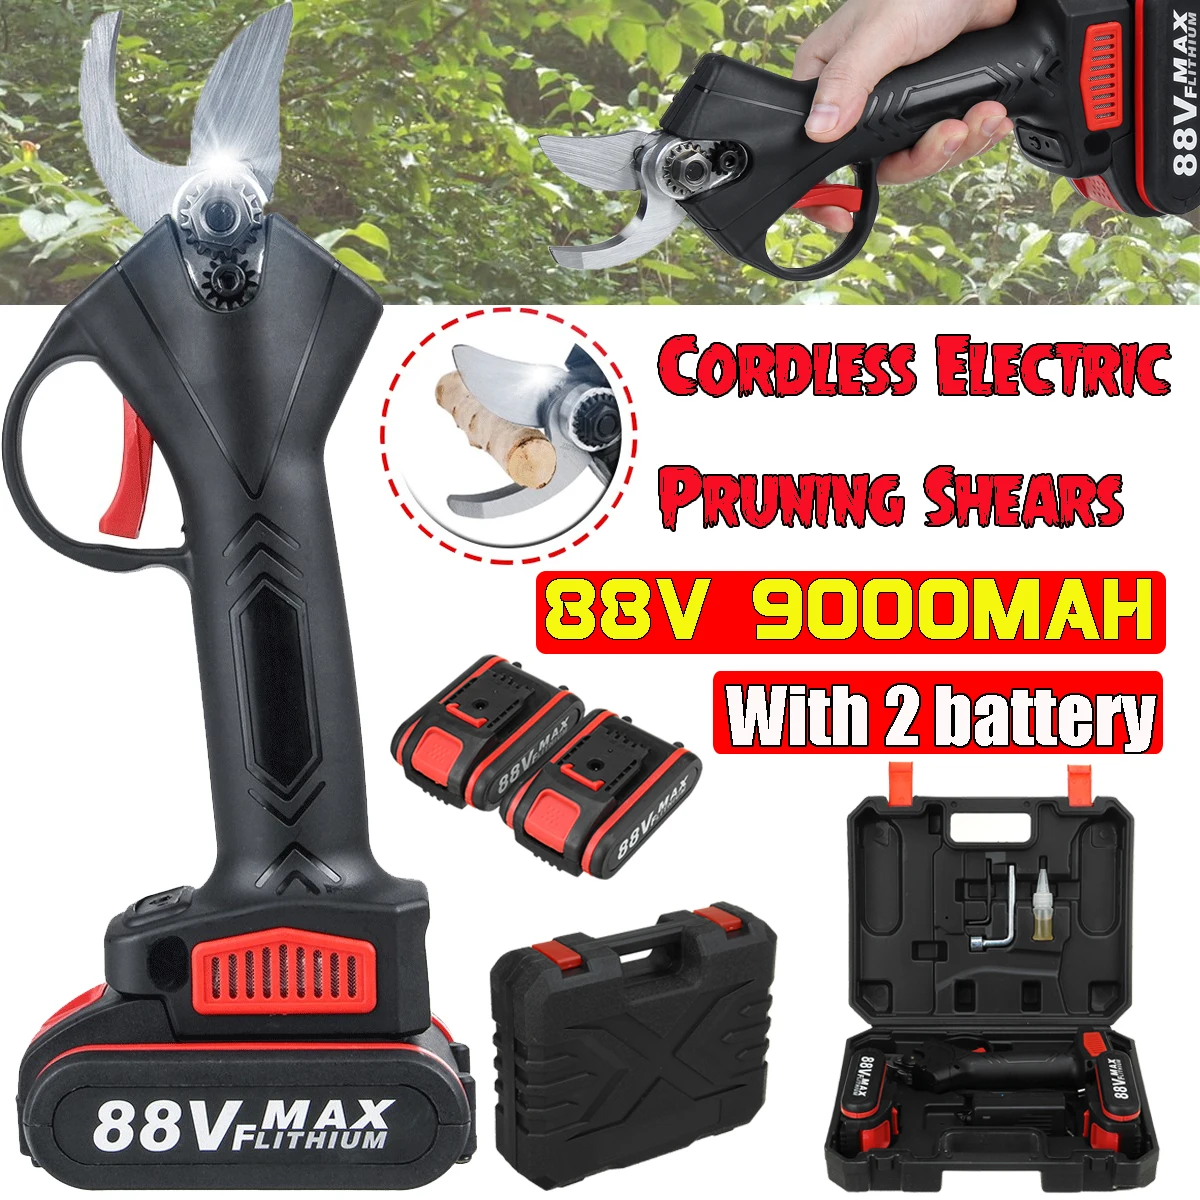 Cordless Electric Pruning Shears Secateur Branch Cutter 88VF 1500mAh Battery 